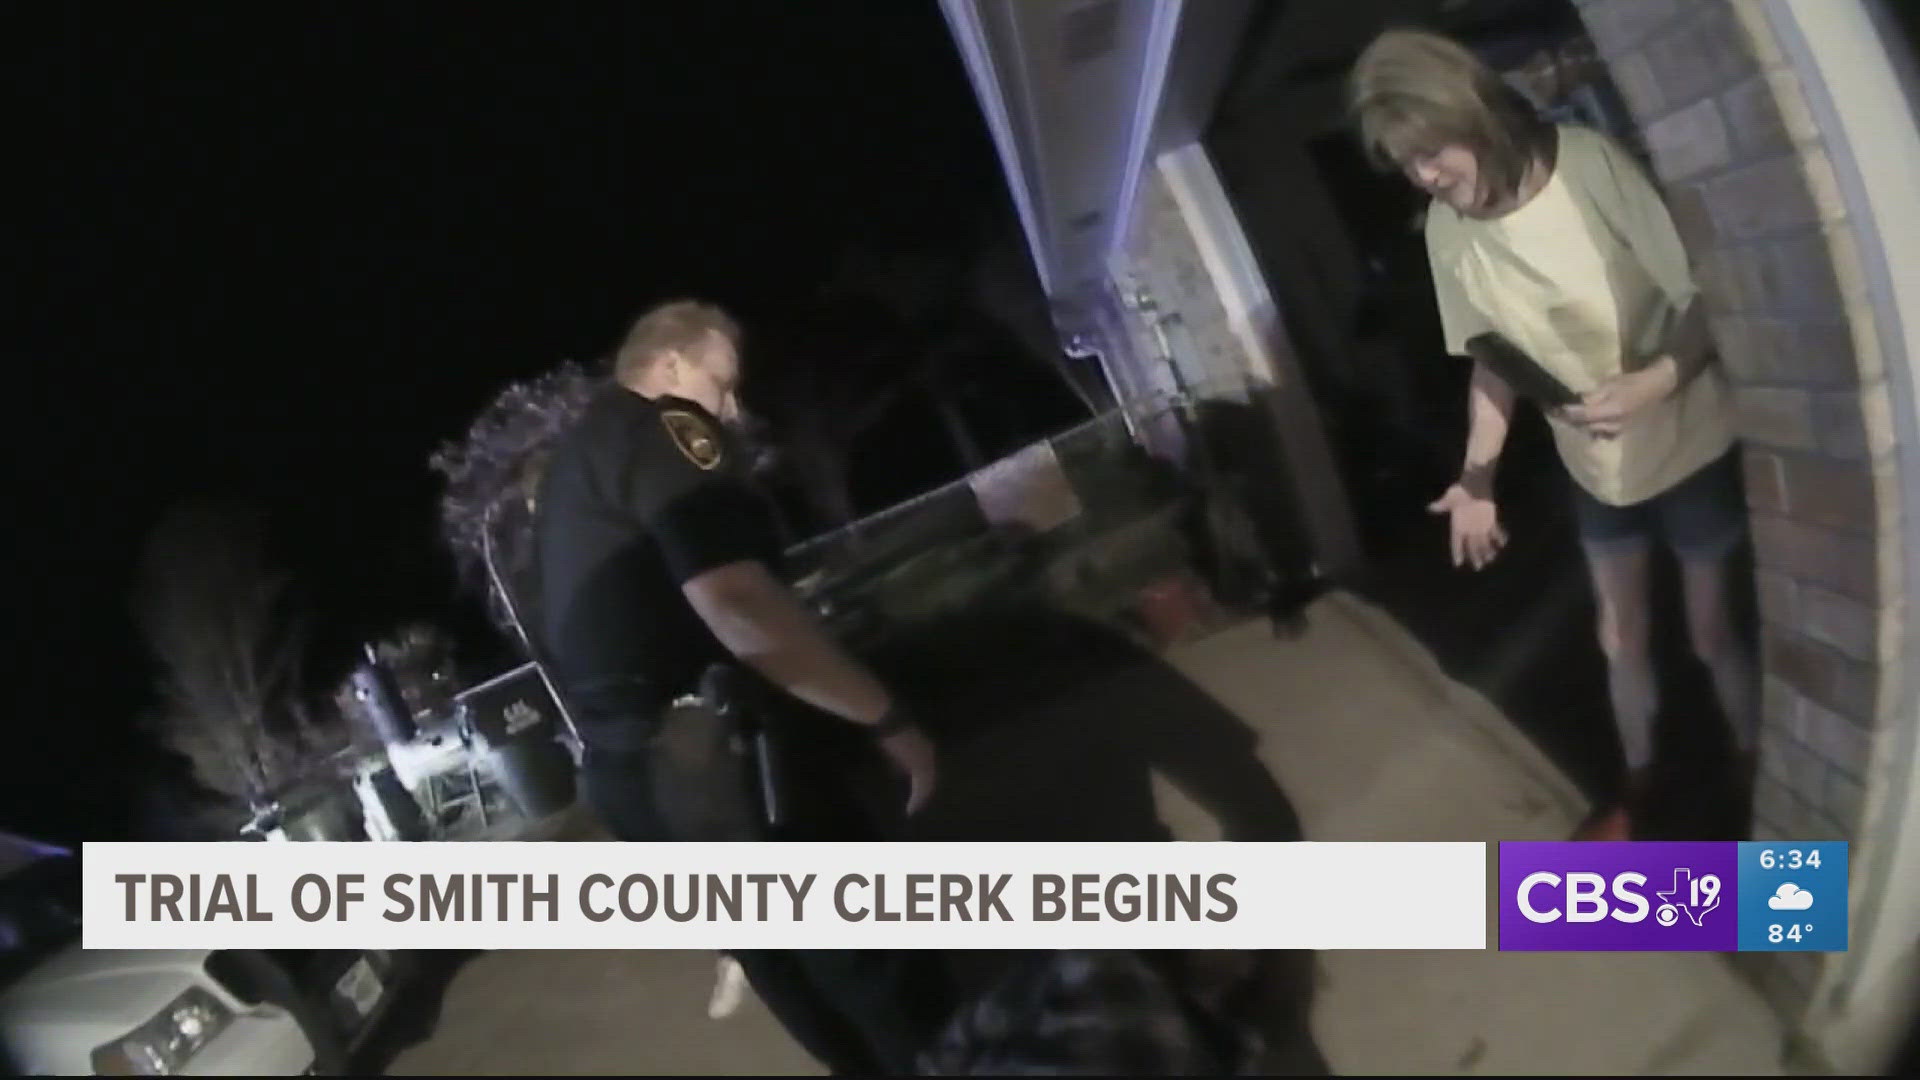 Trial begins for Smith County Clerk Karen Phillips accused of interfering with her son's arrest